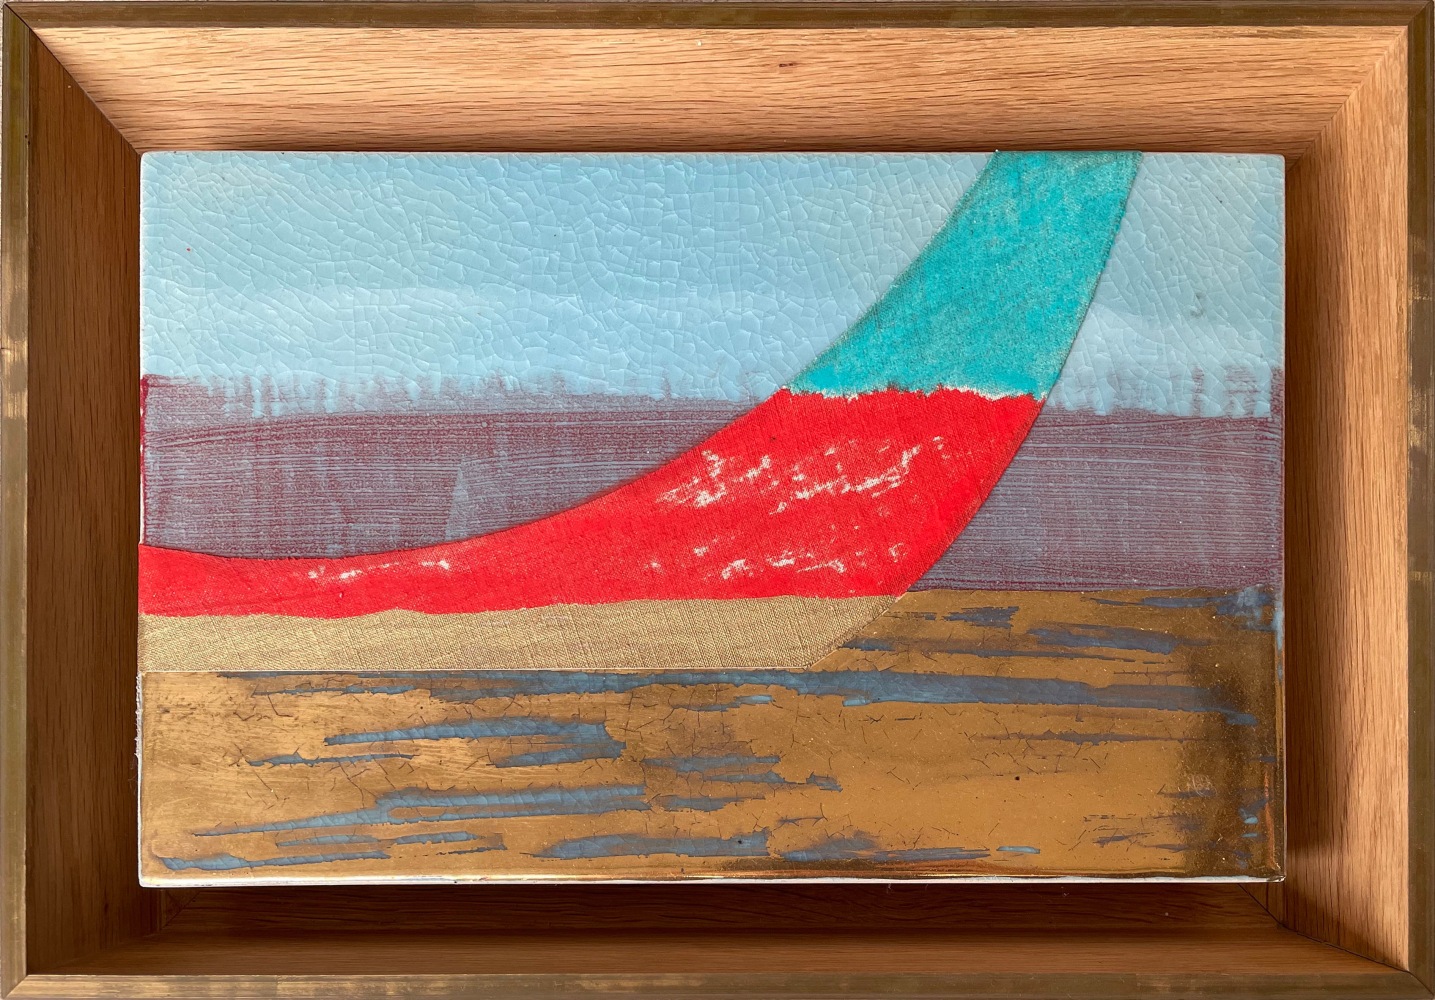 Frank.Olt.Untitled.Encaustic.on.Canvas.with.Ceramic.red.boat.blue.sail